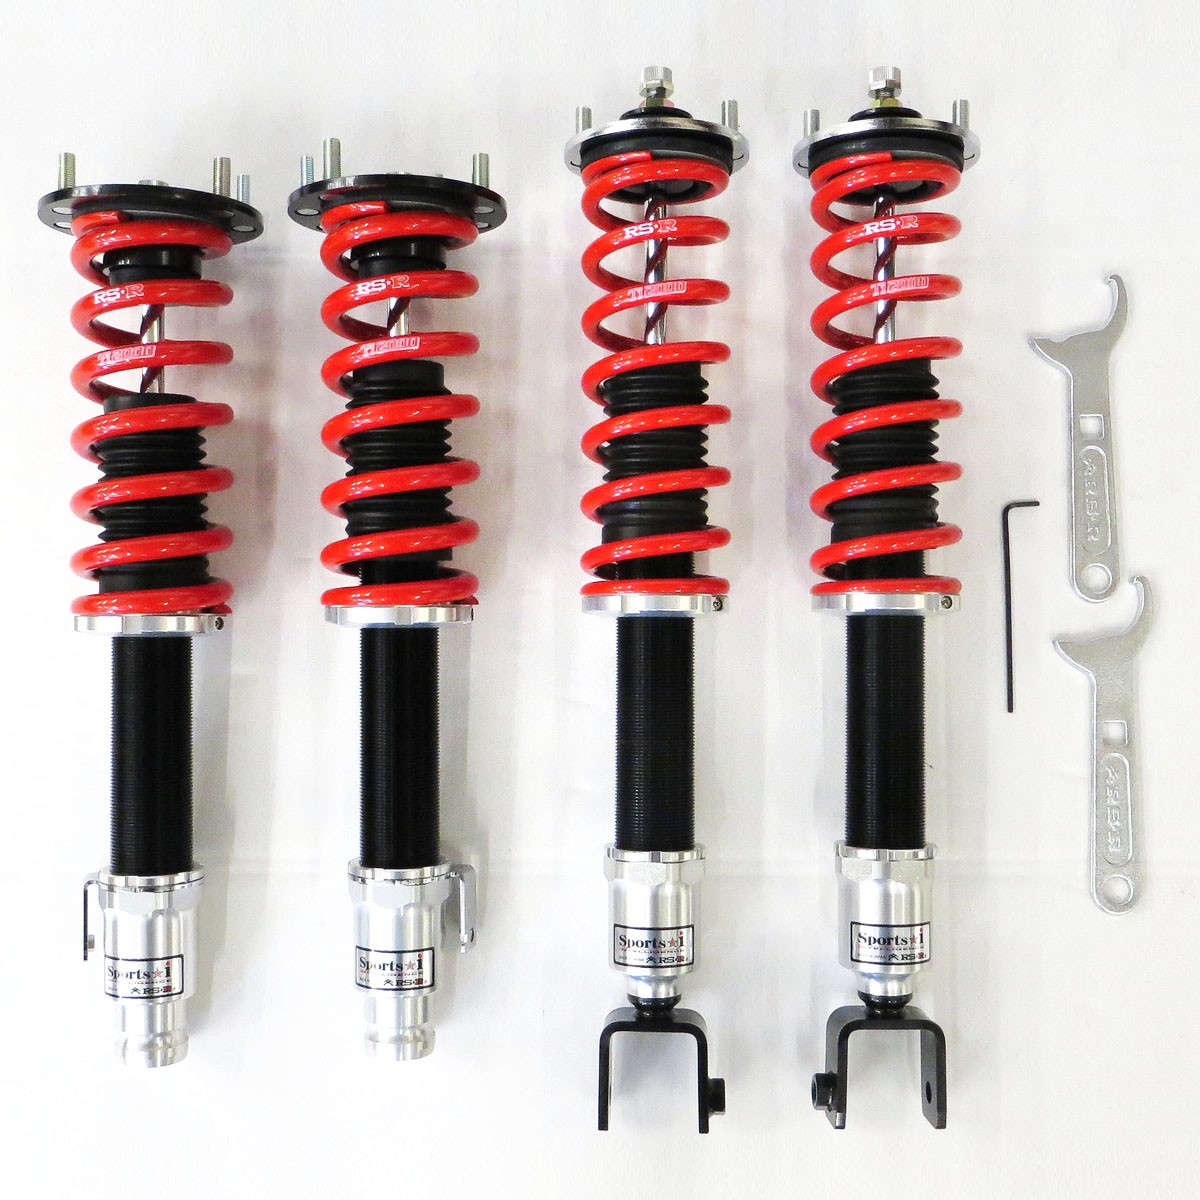 RS-R Best☆i Coilovers for Toyota GR Yaris Turbo 4wd GXPA16